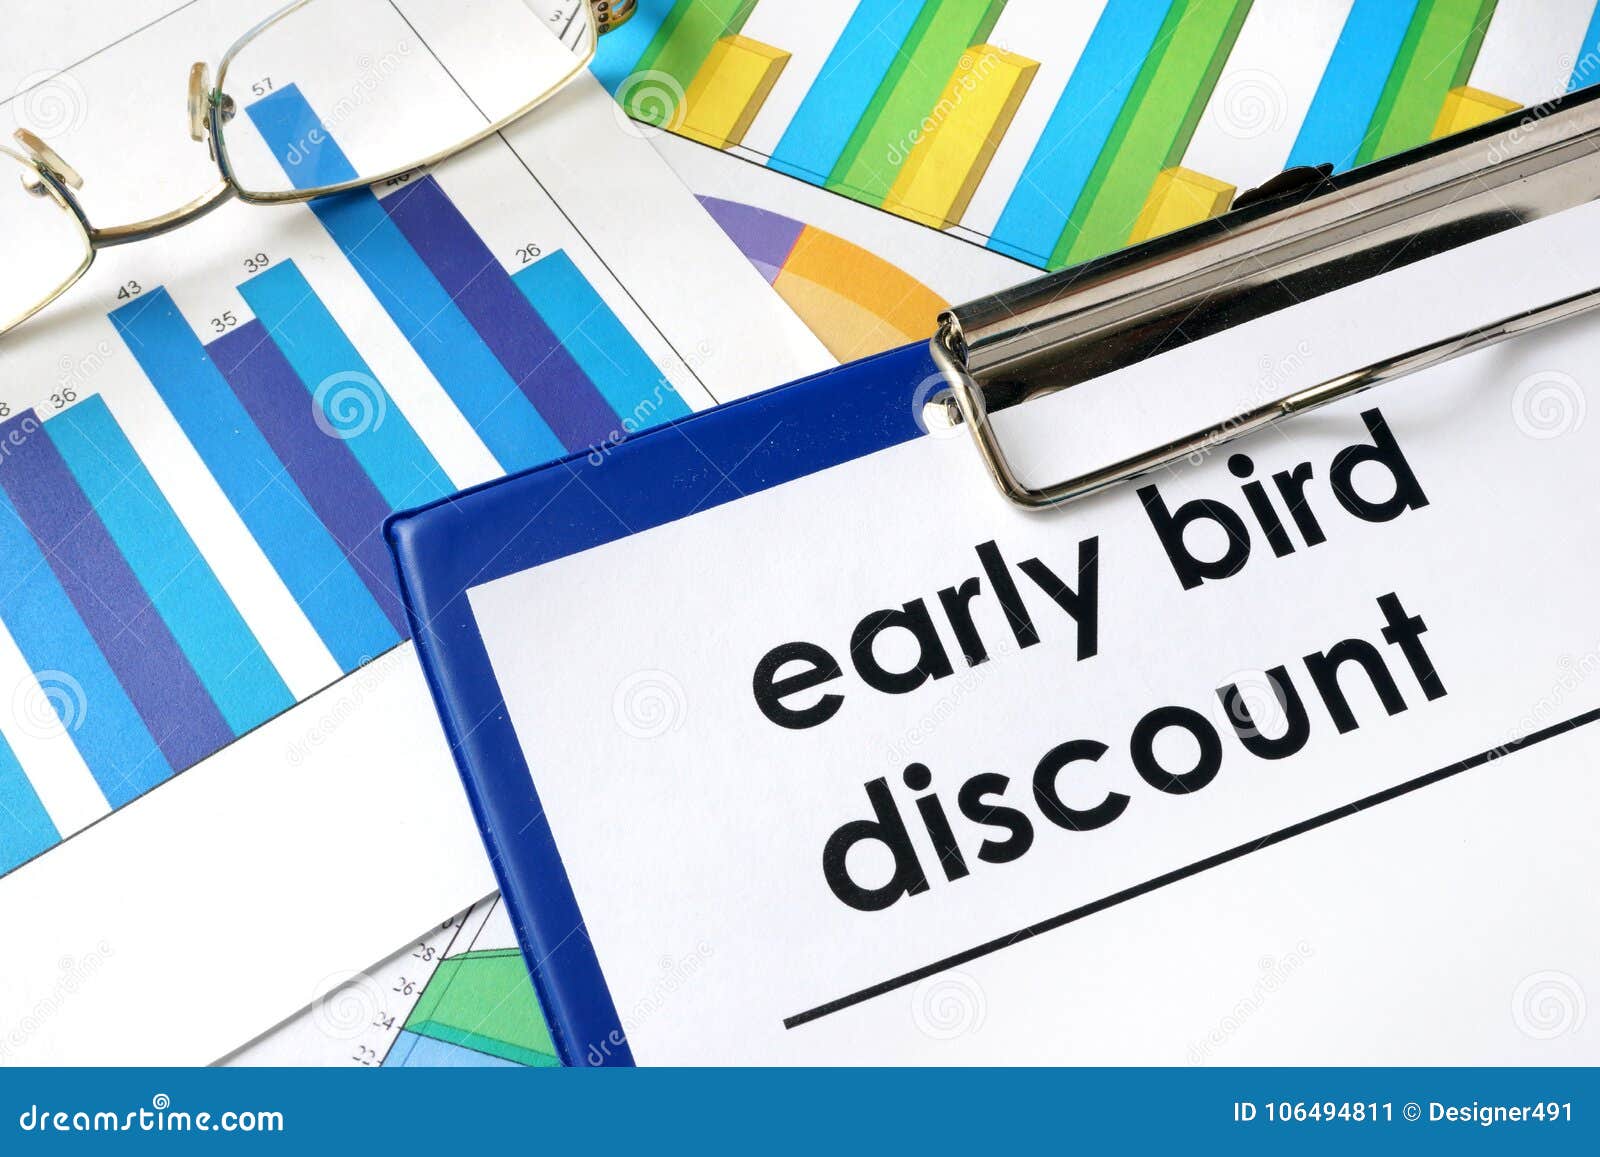 paper with words early bird discount.